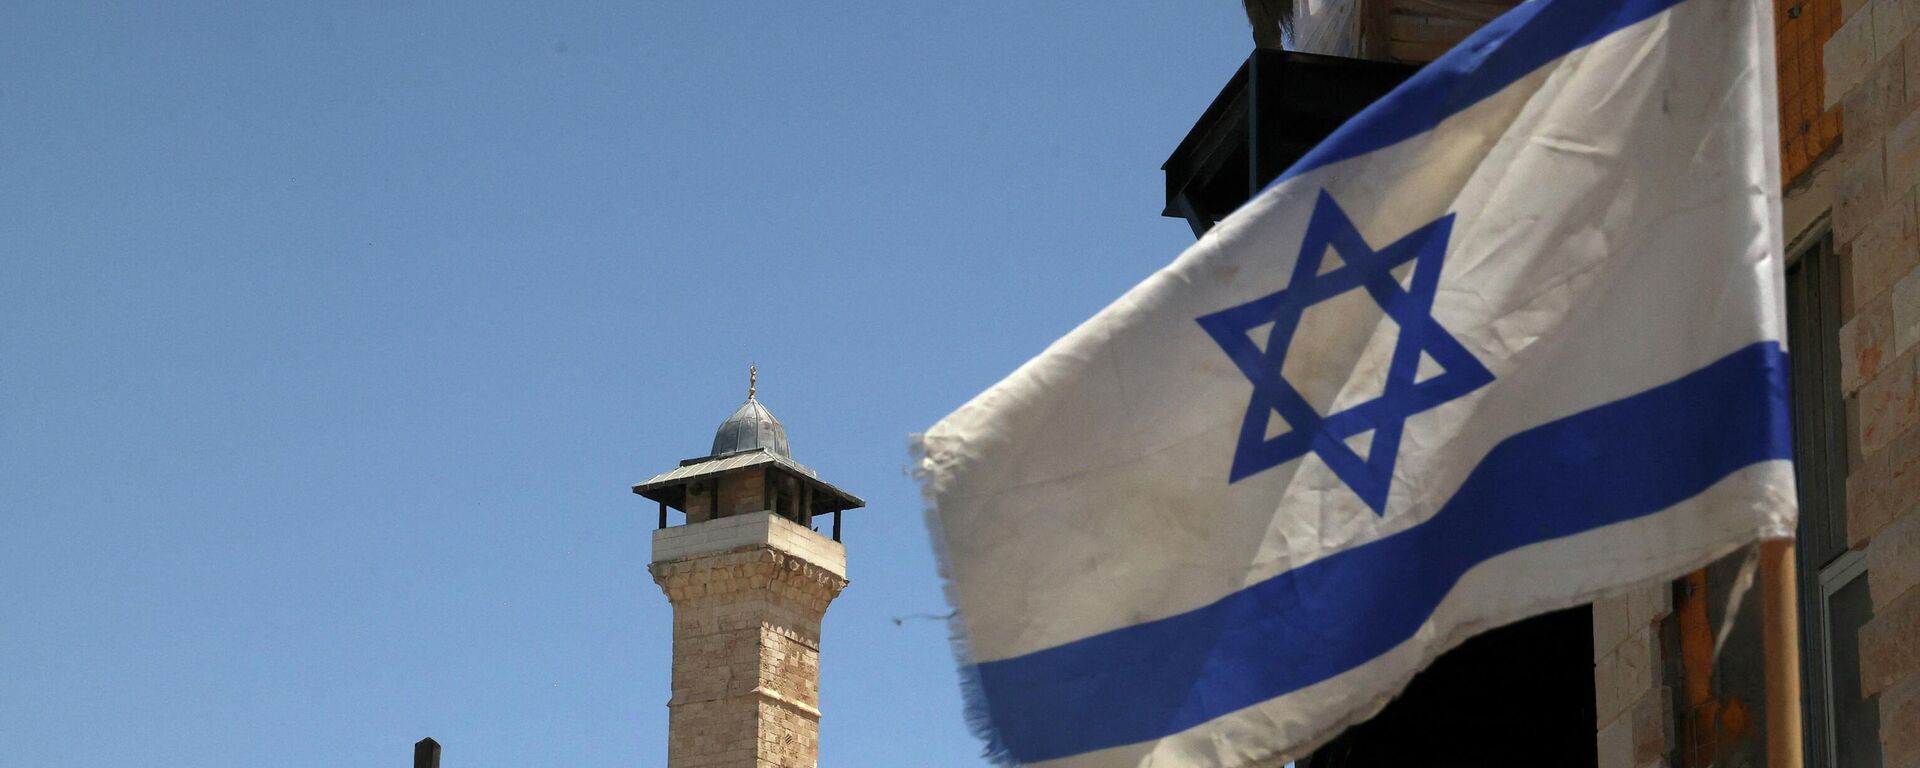 An Israeli flag flies in a street in front of the Ibrahimi Mosque or the Tomb of the patriarches, in the occupied West Bank town of Hebron, on May 26, 2022. - Sputnik International, 1920, 07.06.2022